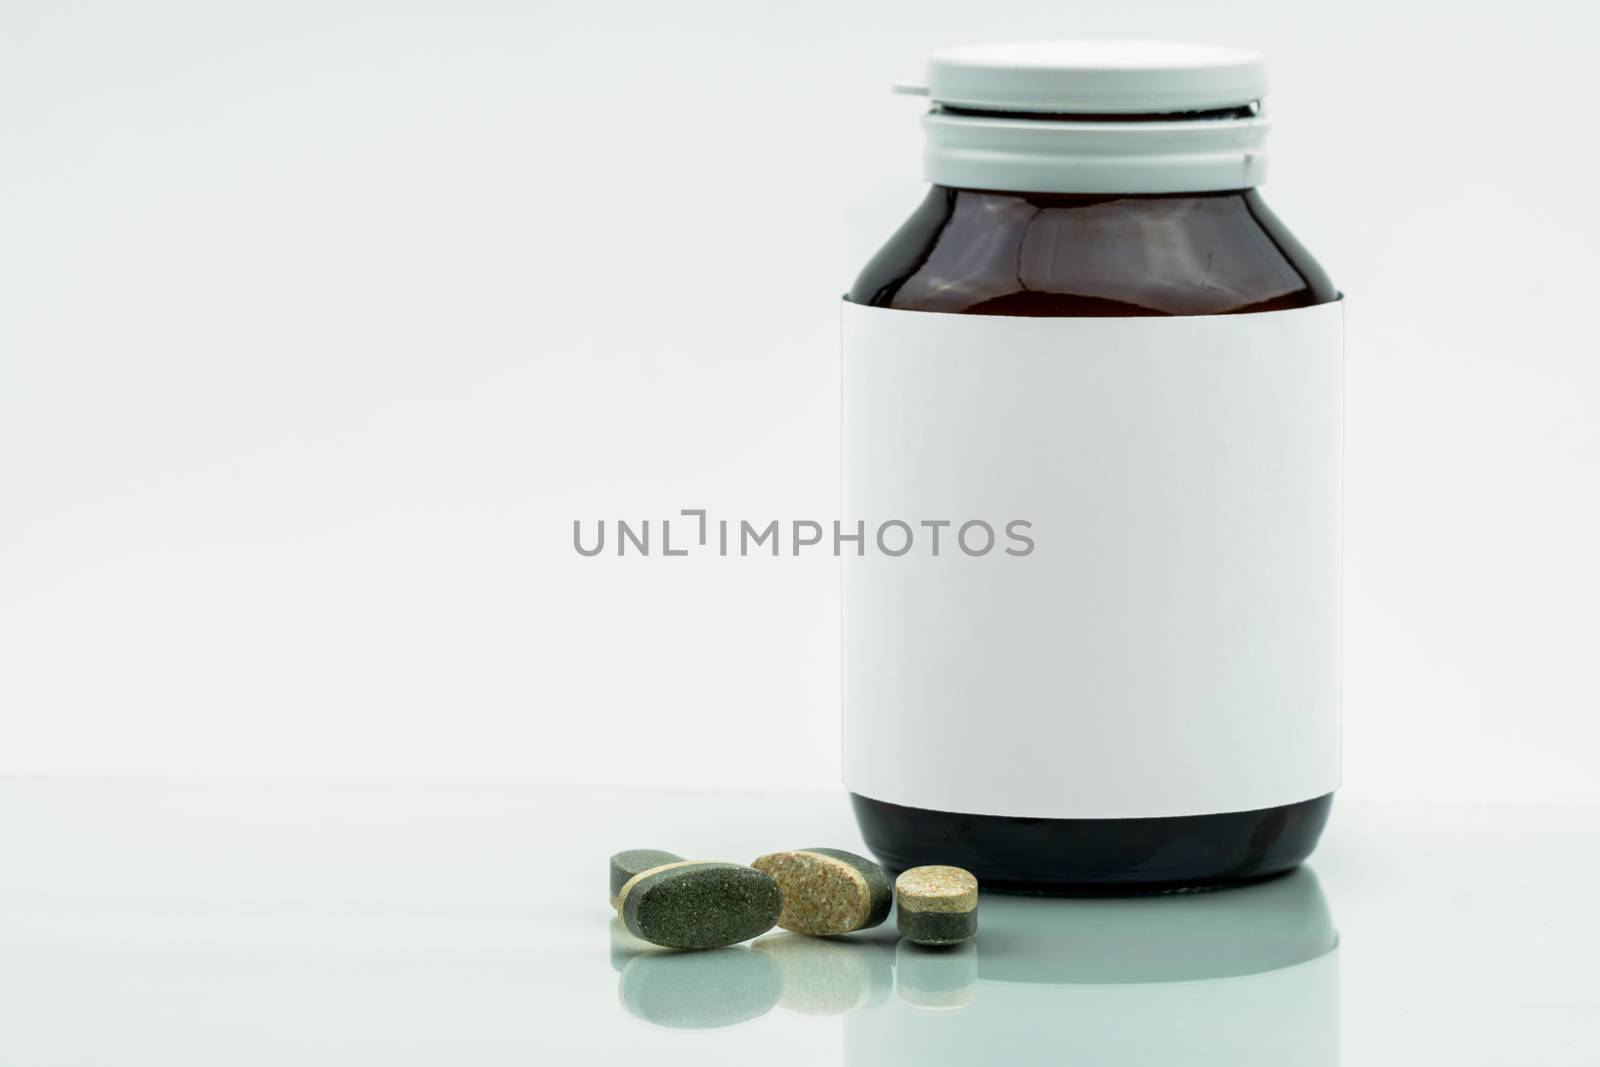 Vitamins, supplements and minerals dual layer tablets pills and medicine amber glass bottle with blank label isolated on white background with copy space. Use for vitamins and supplements advertising. by Fahroni